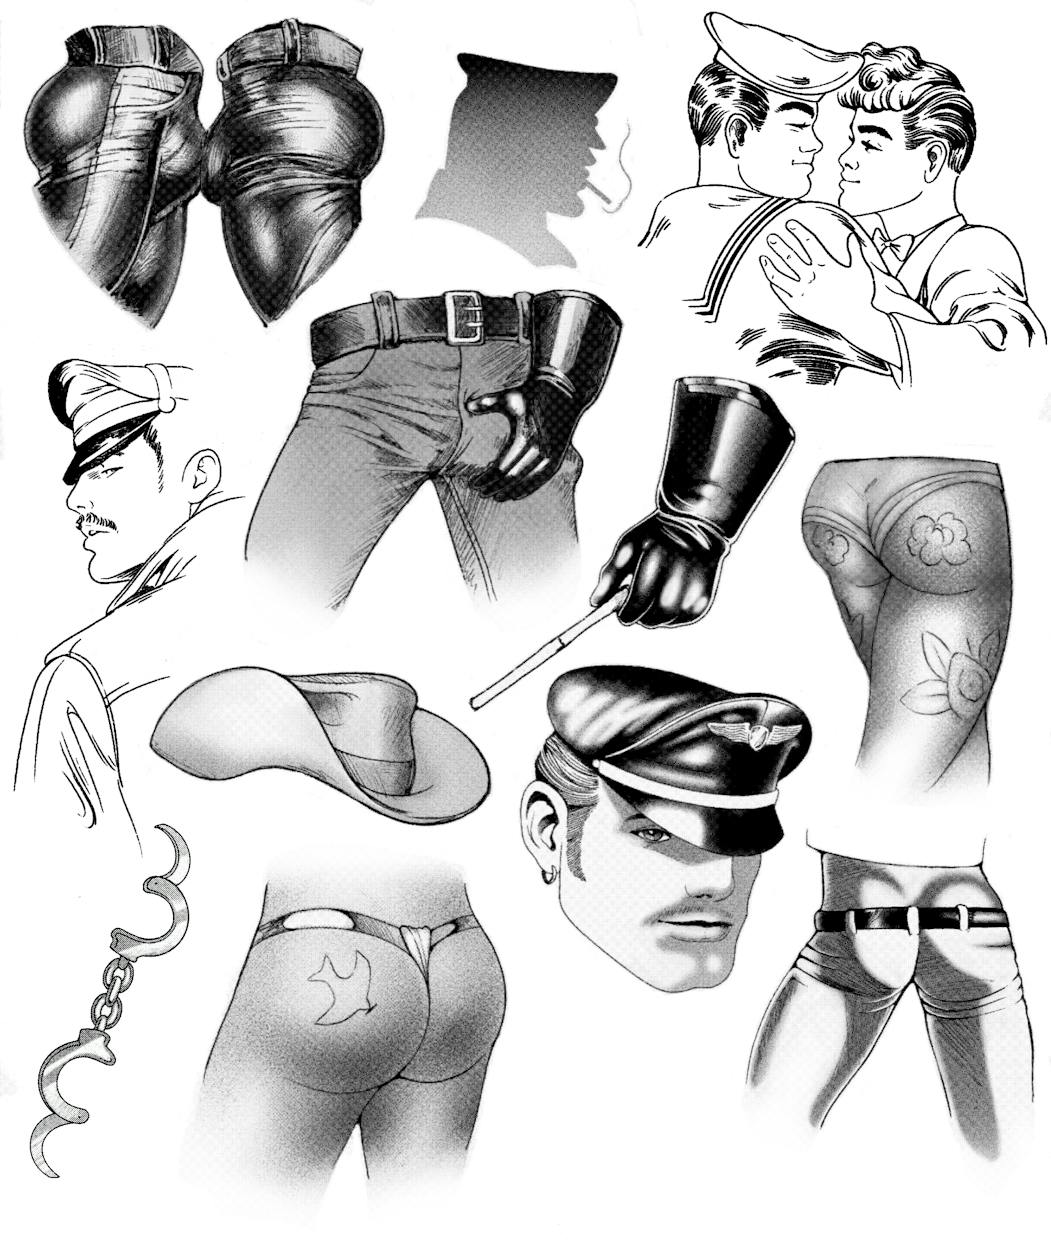 A flash tattoo sheet with various designs depicting muscular men in various sexual poses in the style of Tom of Finland